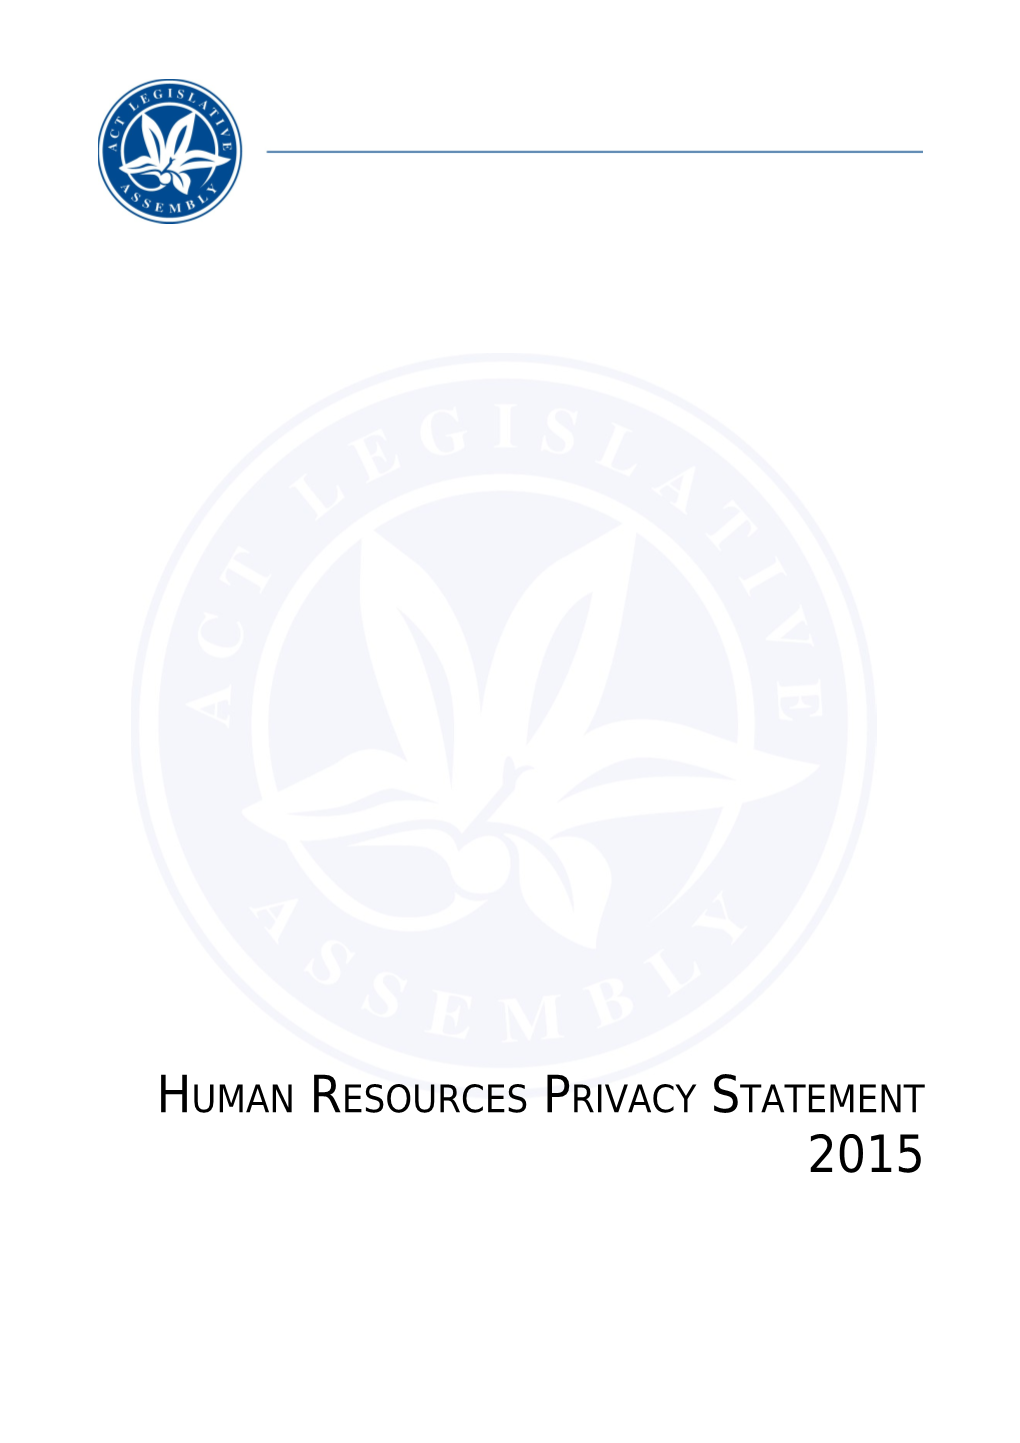 Human Resources Privacy Statement 2015